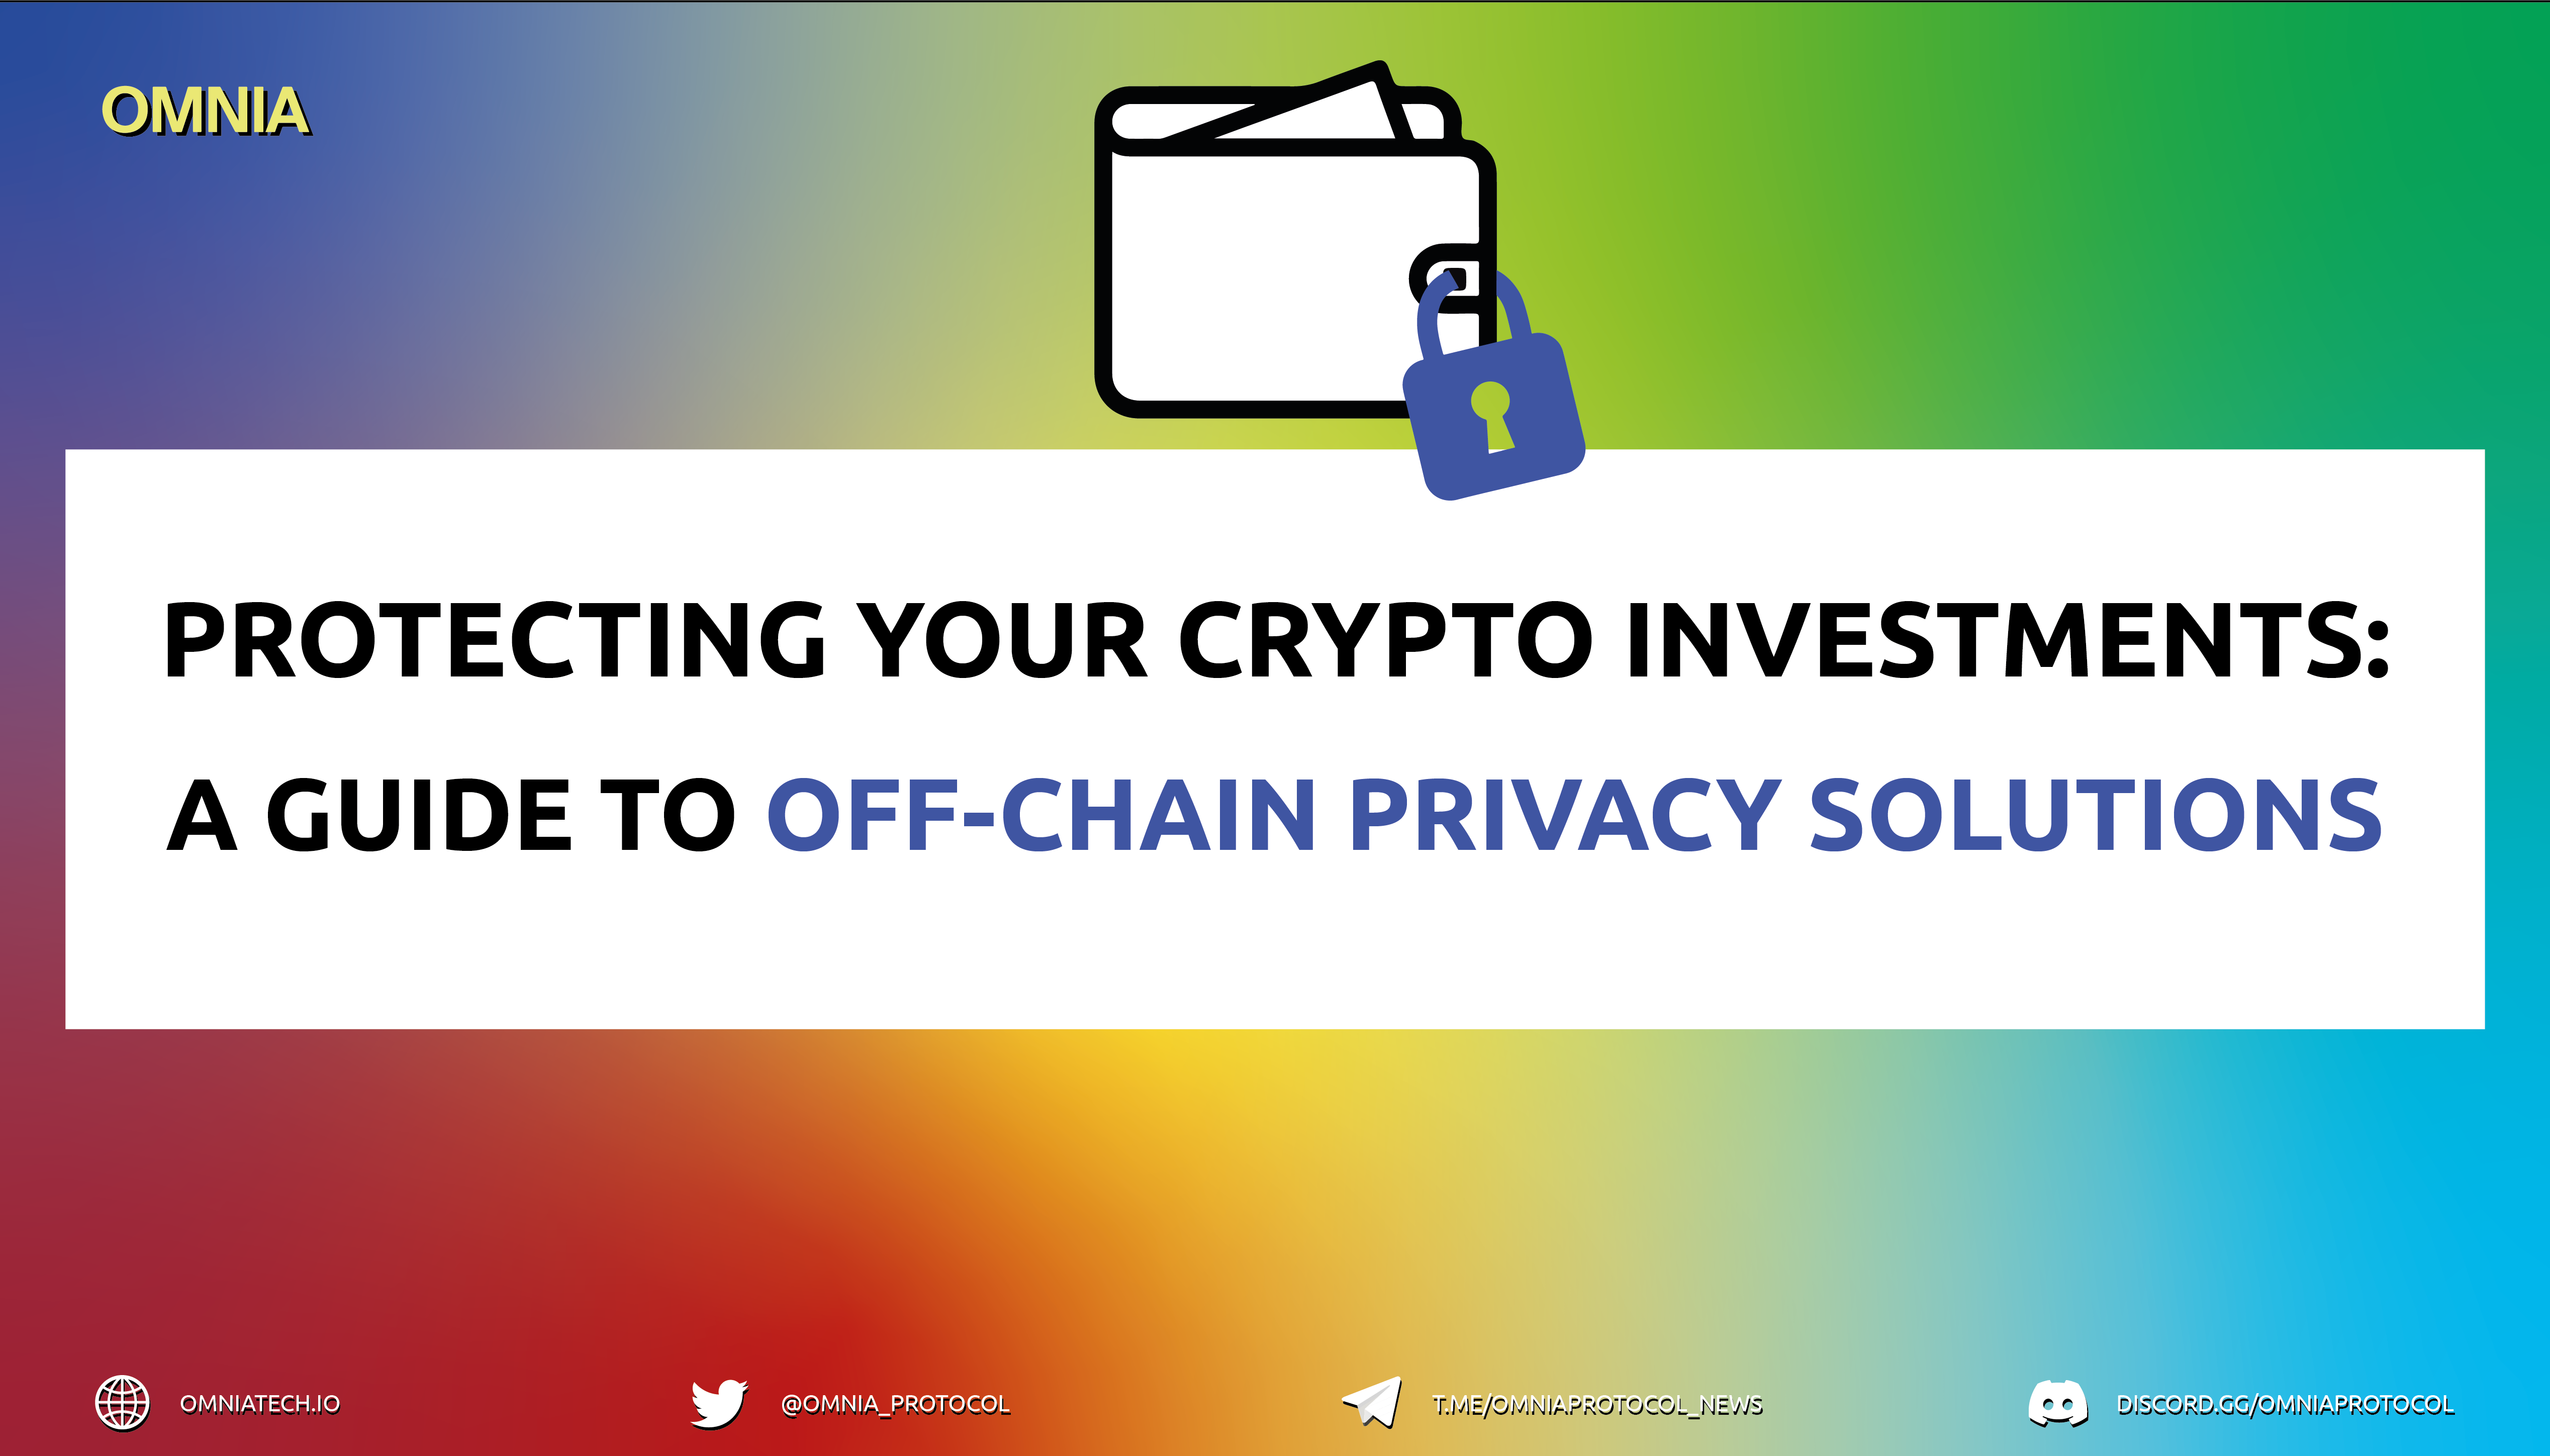 Protecting Your Crypto Investments: A Guide to Off-chain Privacy Solutions